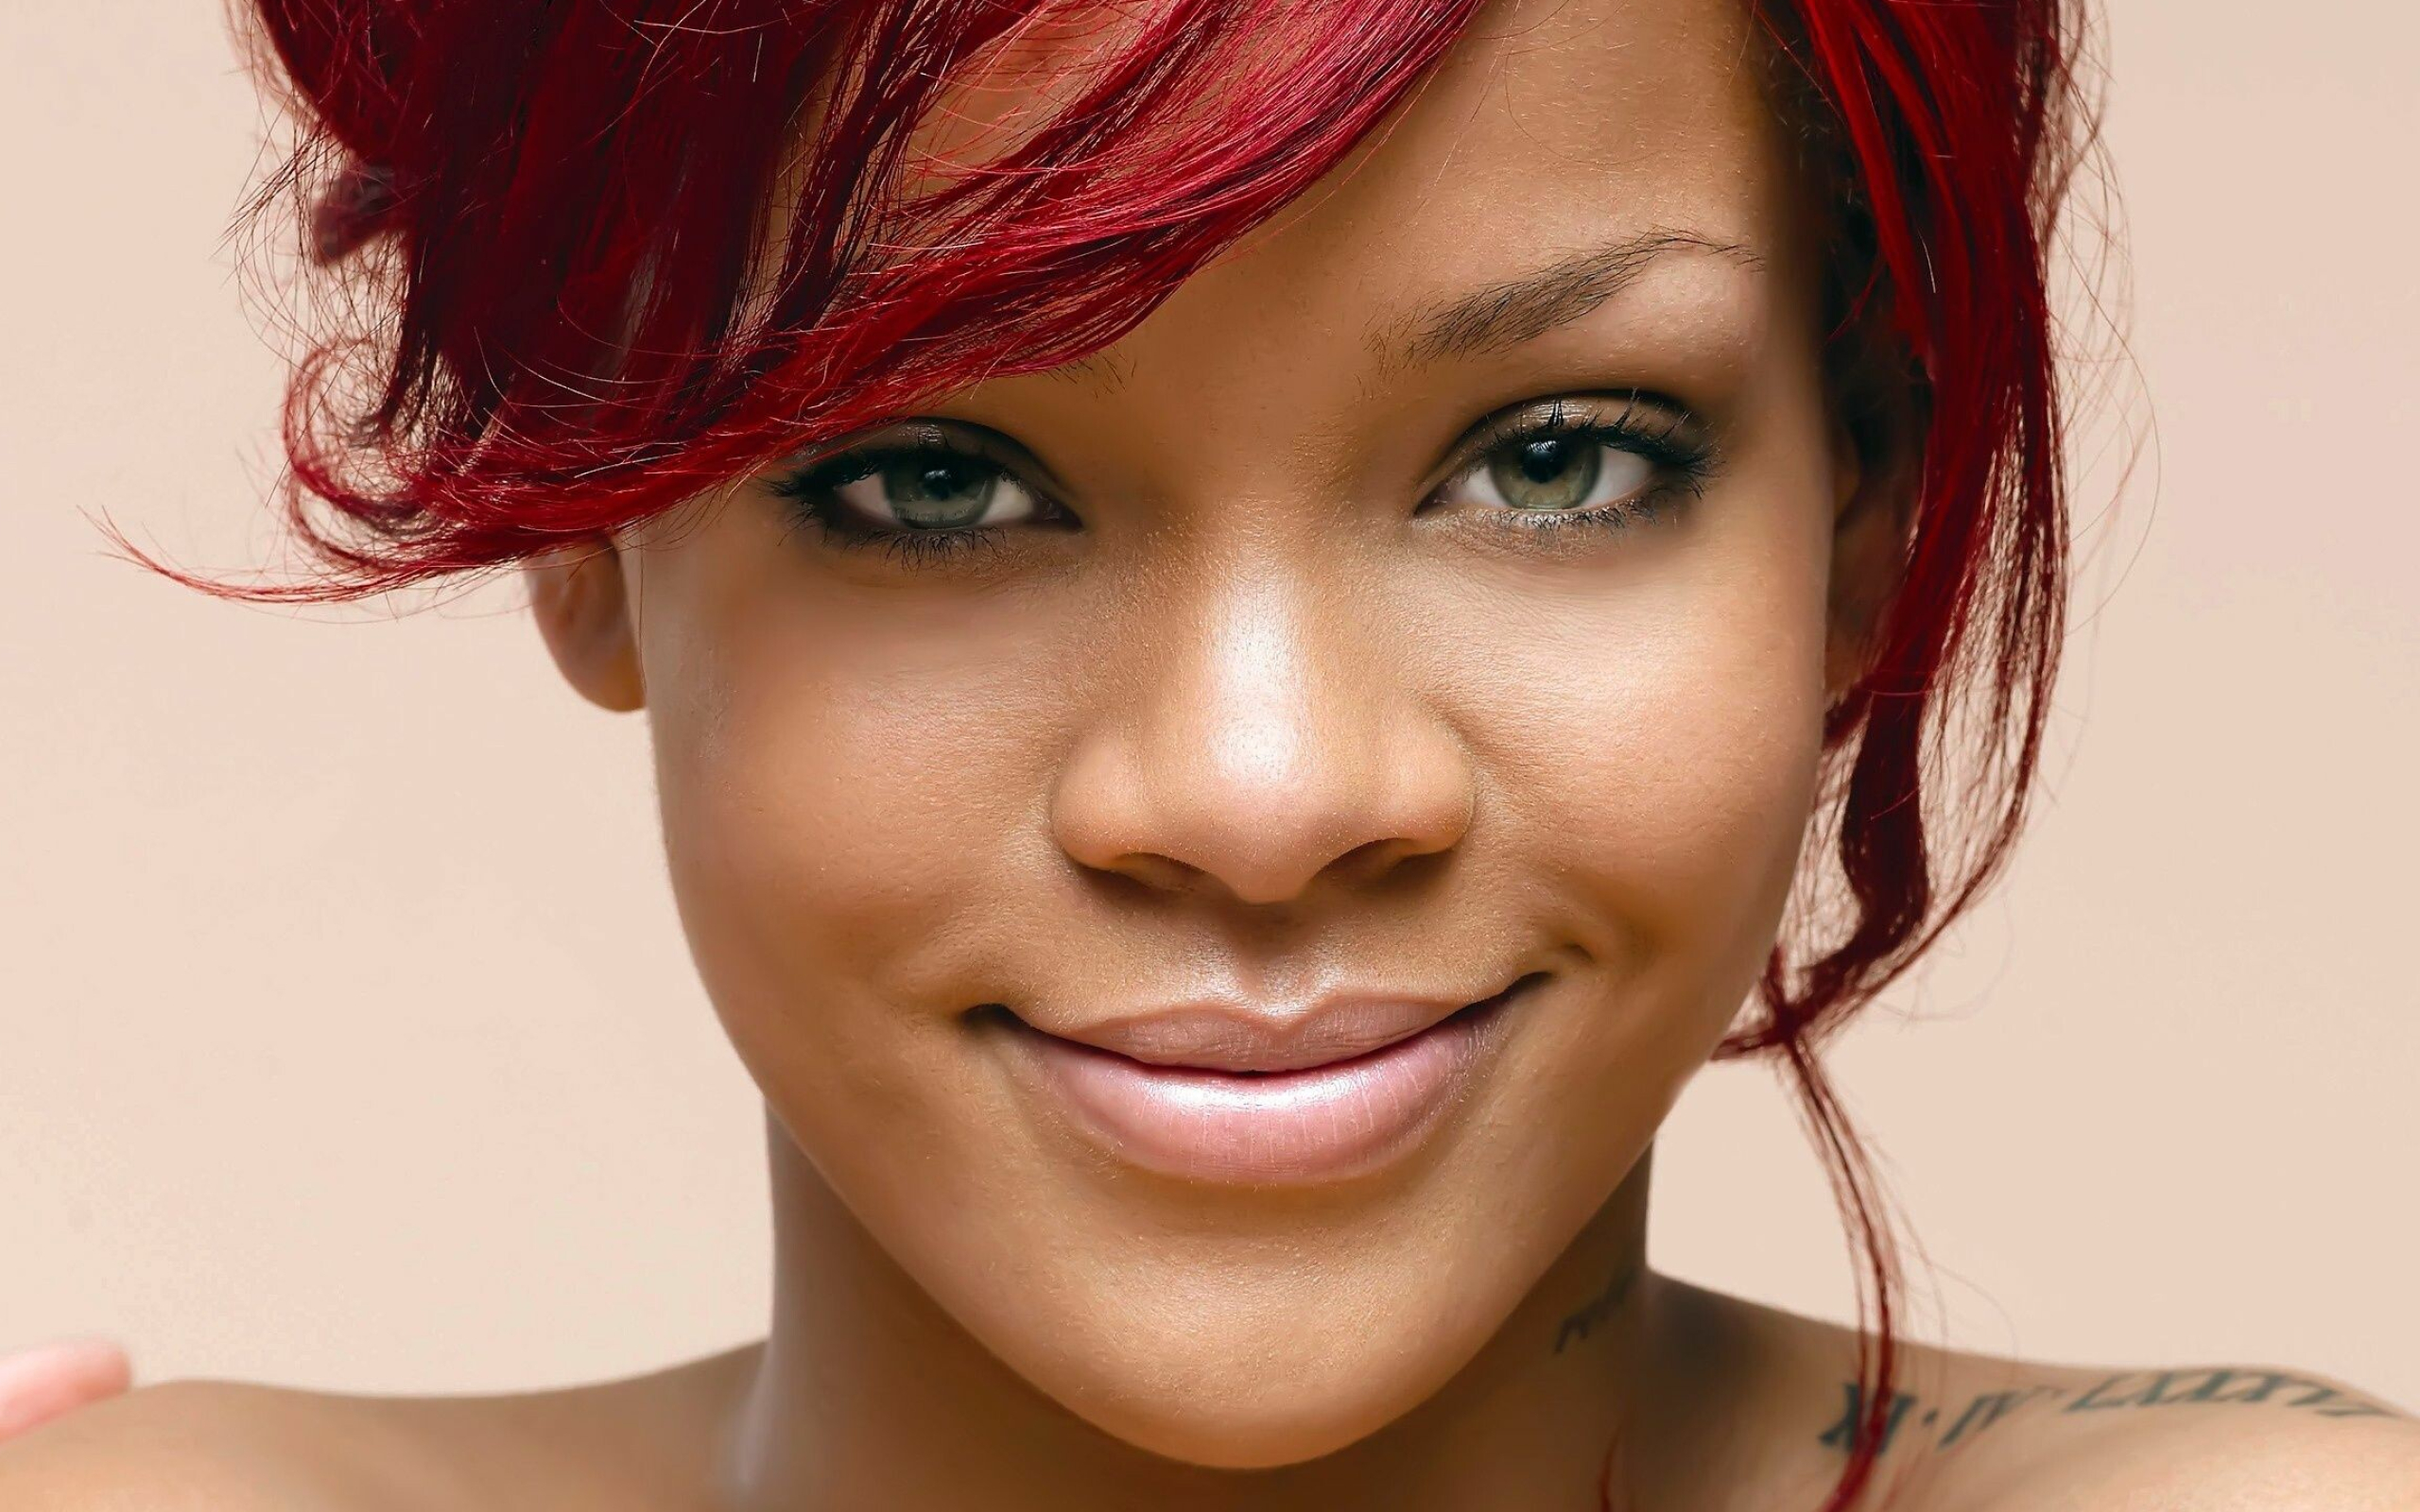 Rihanna: Named as one of the 100 most influential people in the world in 2012 and 2018 by Time. 2560x1600 HD Wallpaper.